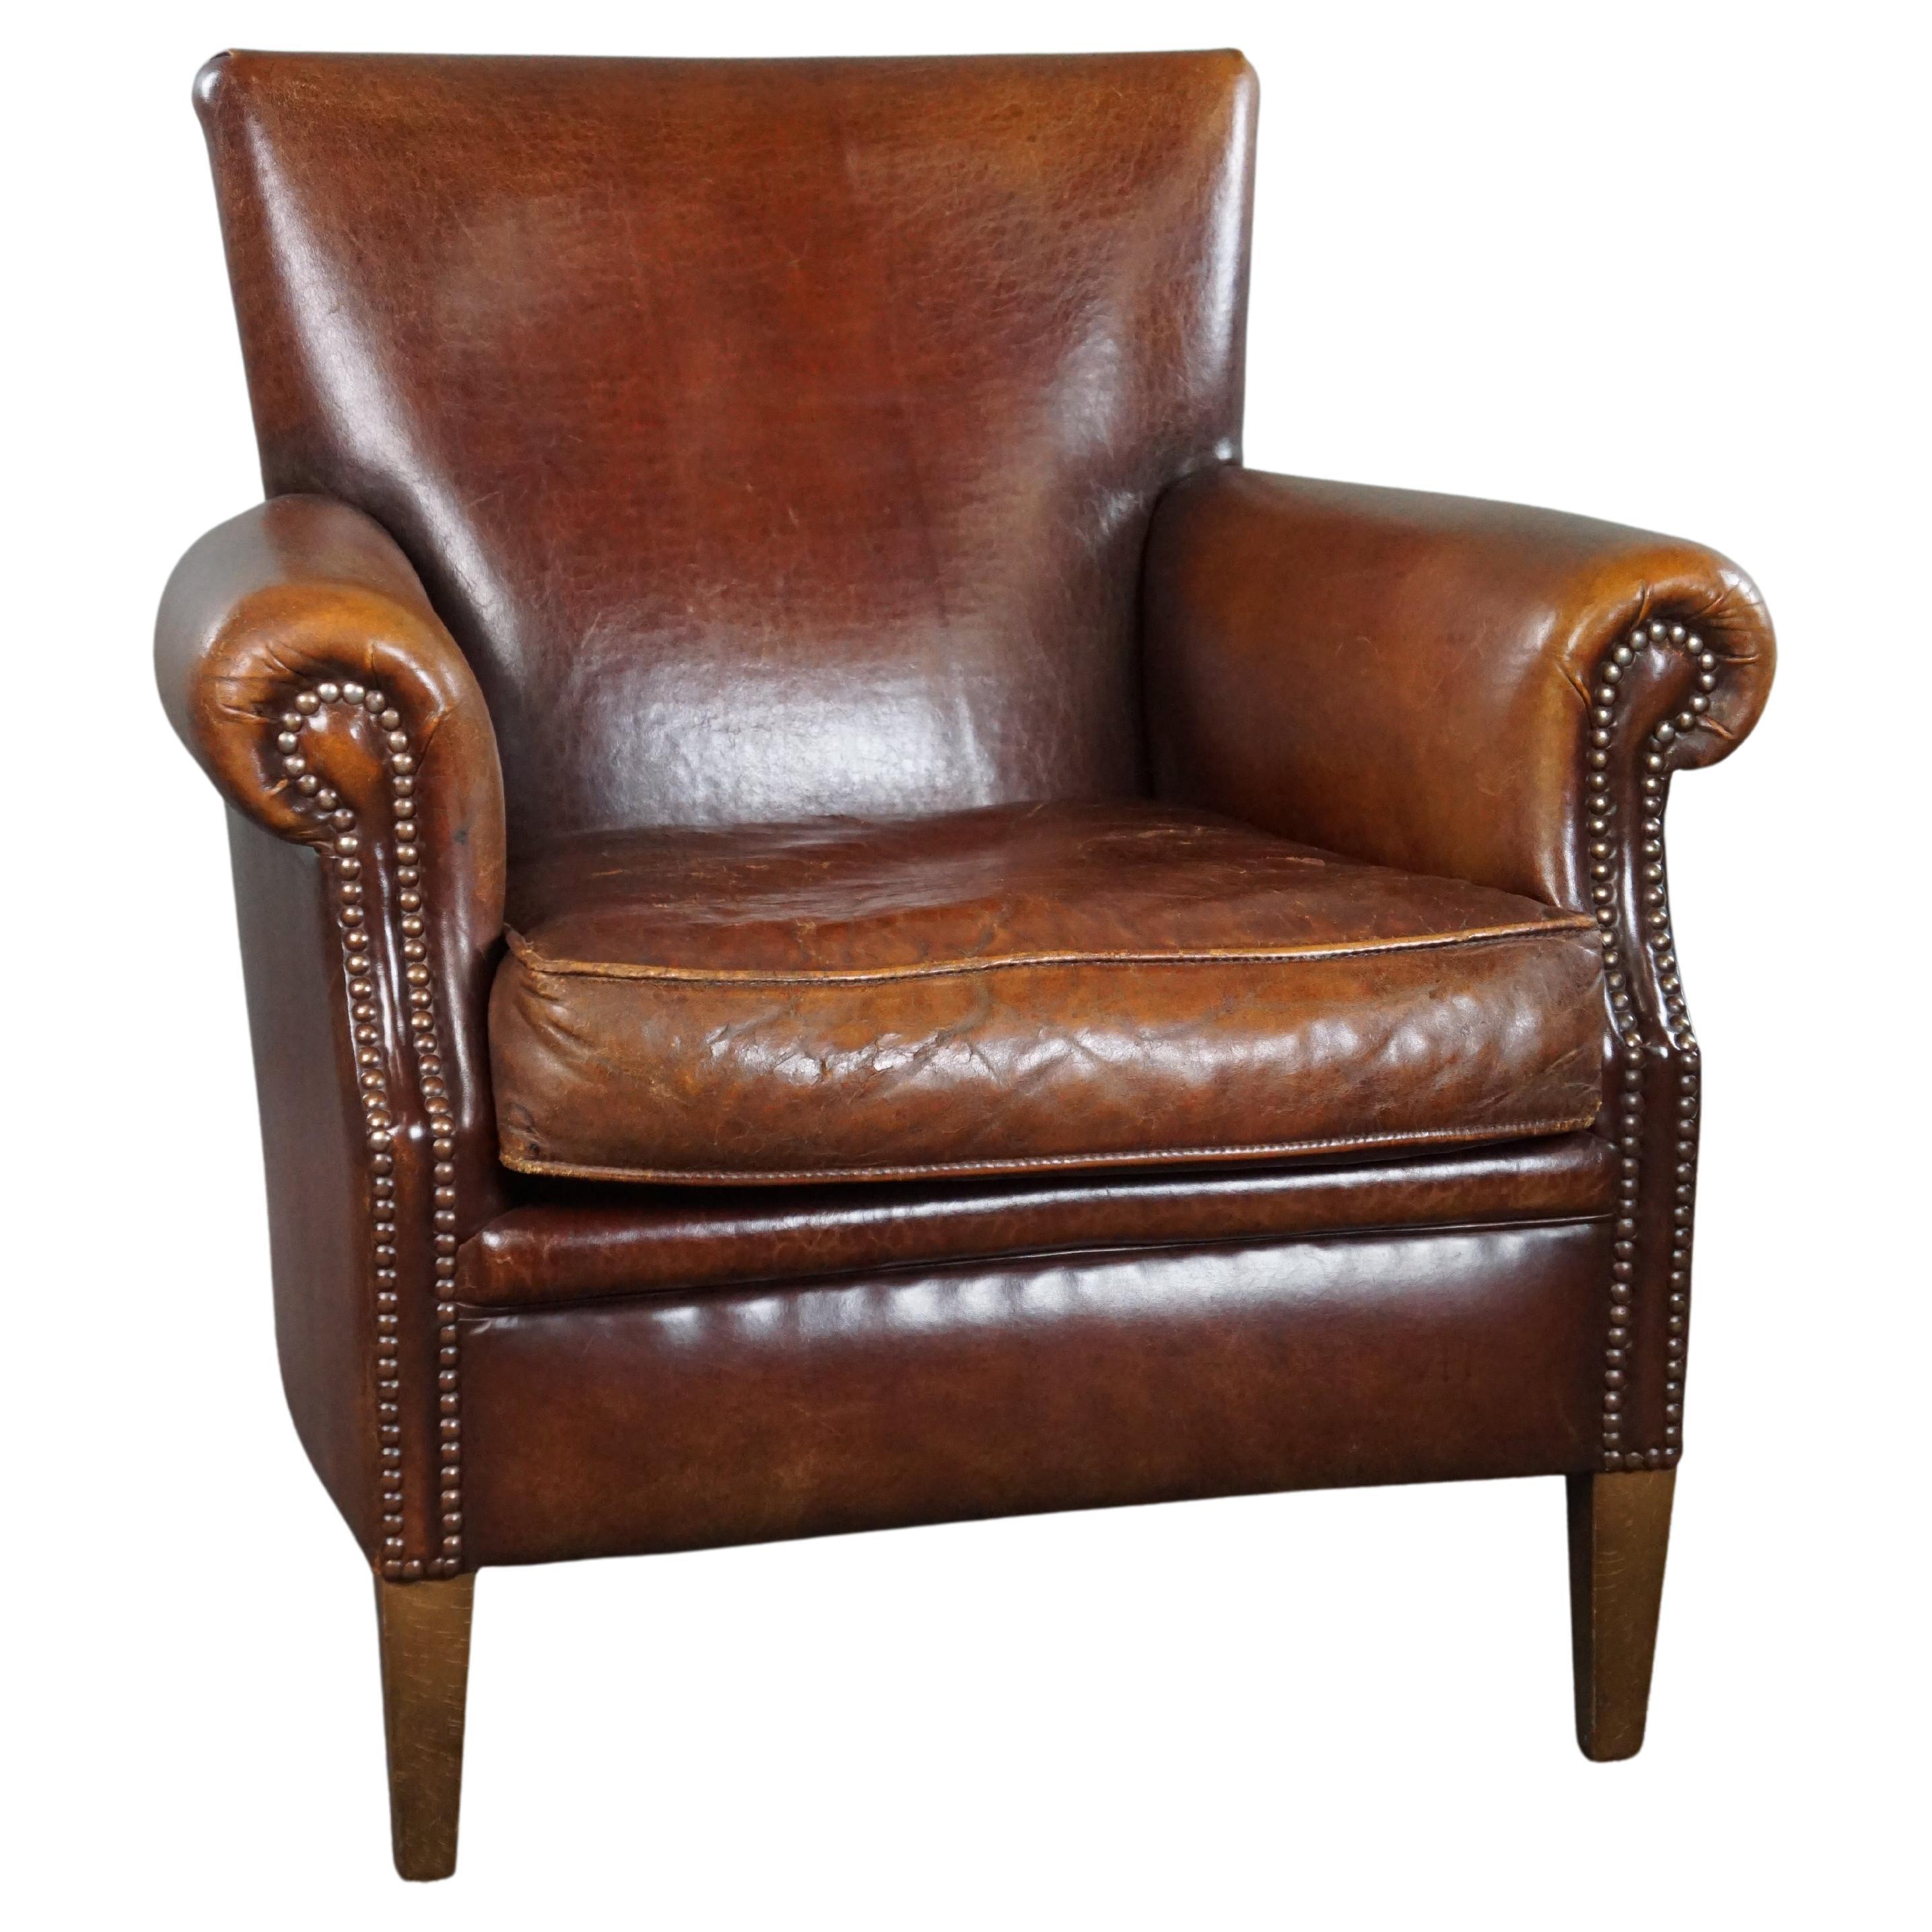 Sheepskin armchair with a wonderful patina and a correct worn look For Sale